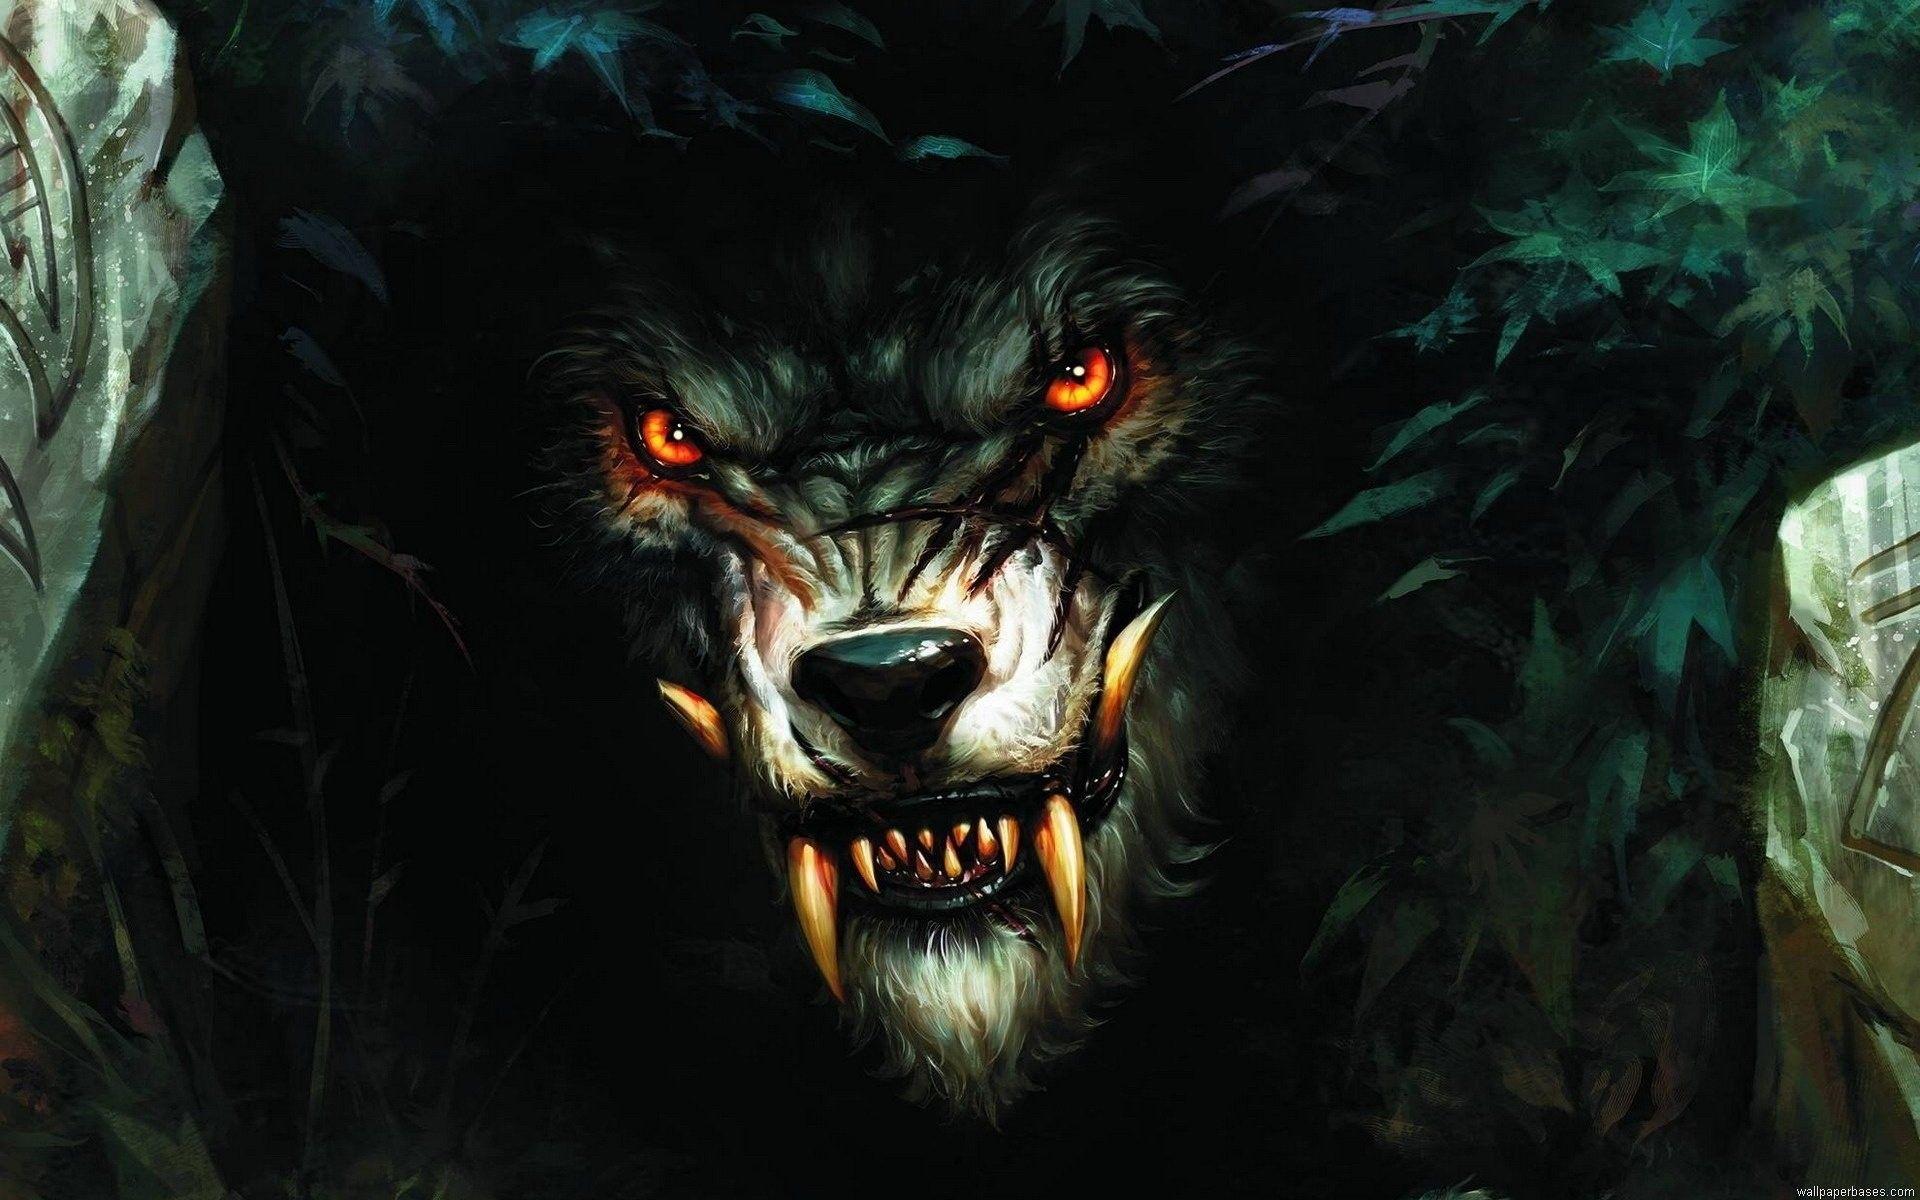 Werewolf Image and Wallpaper